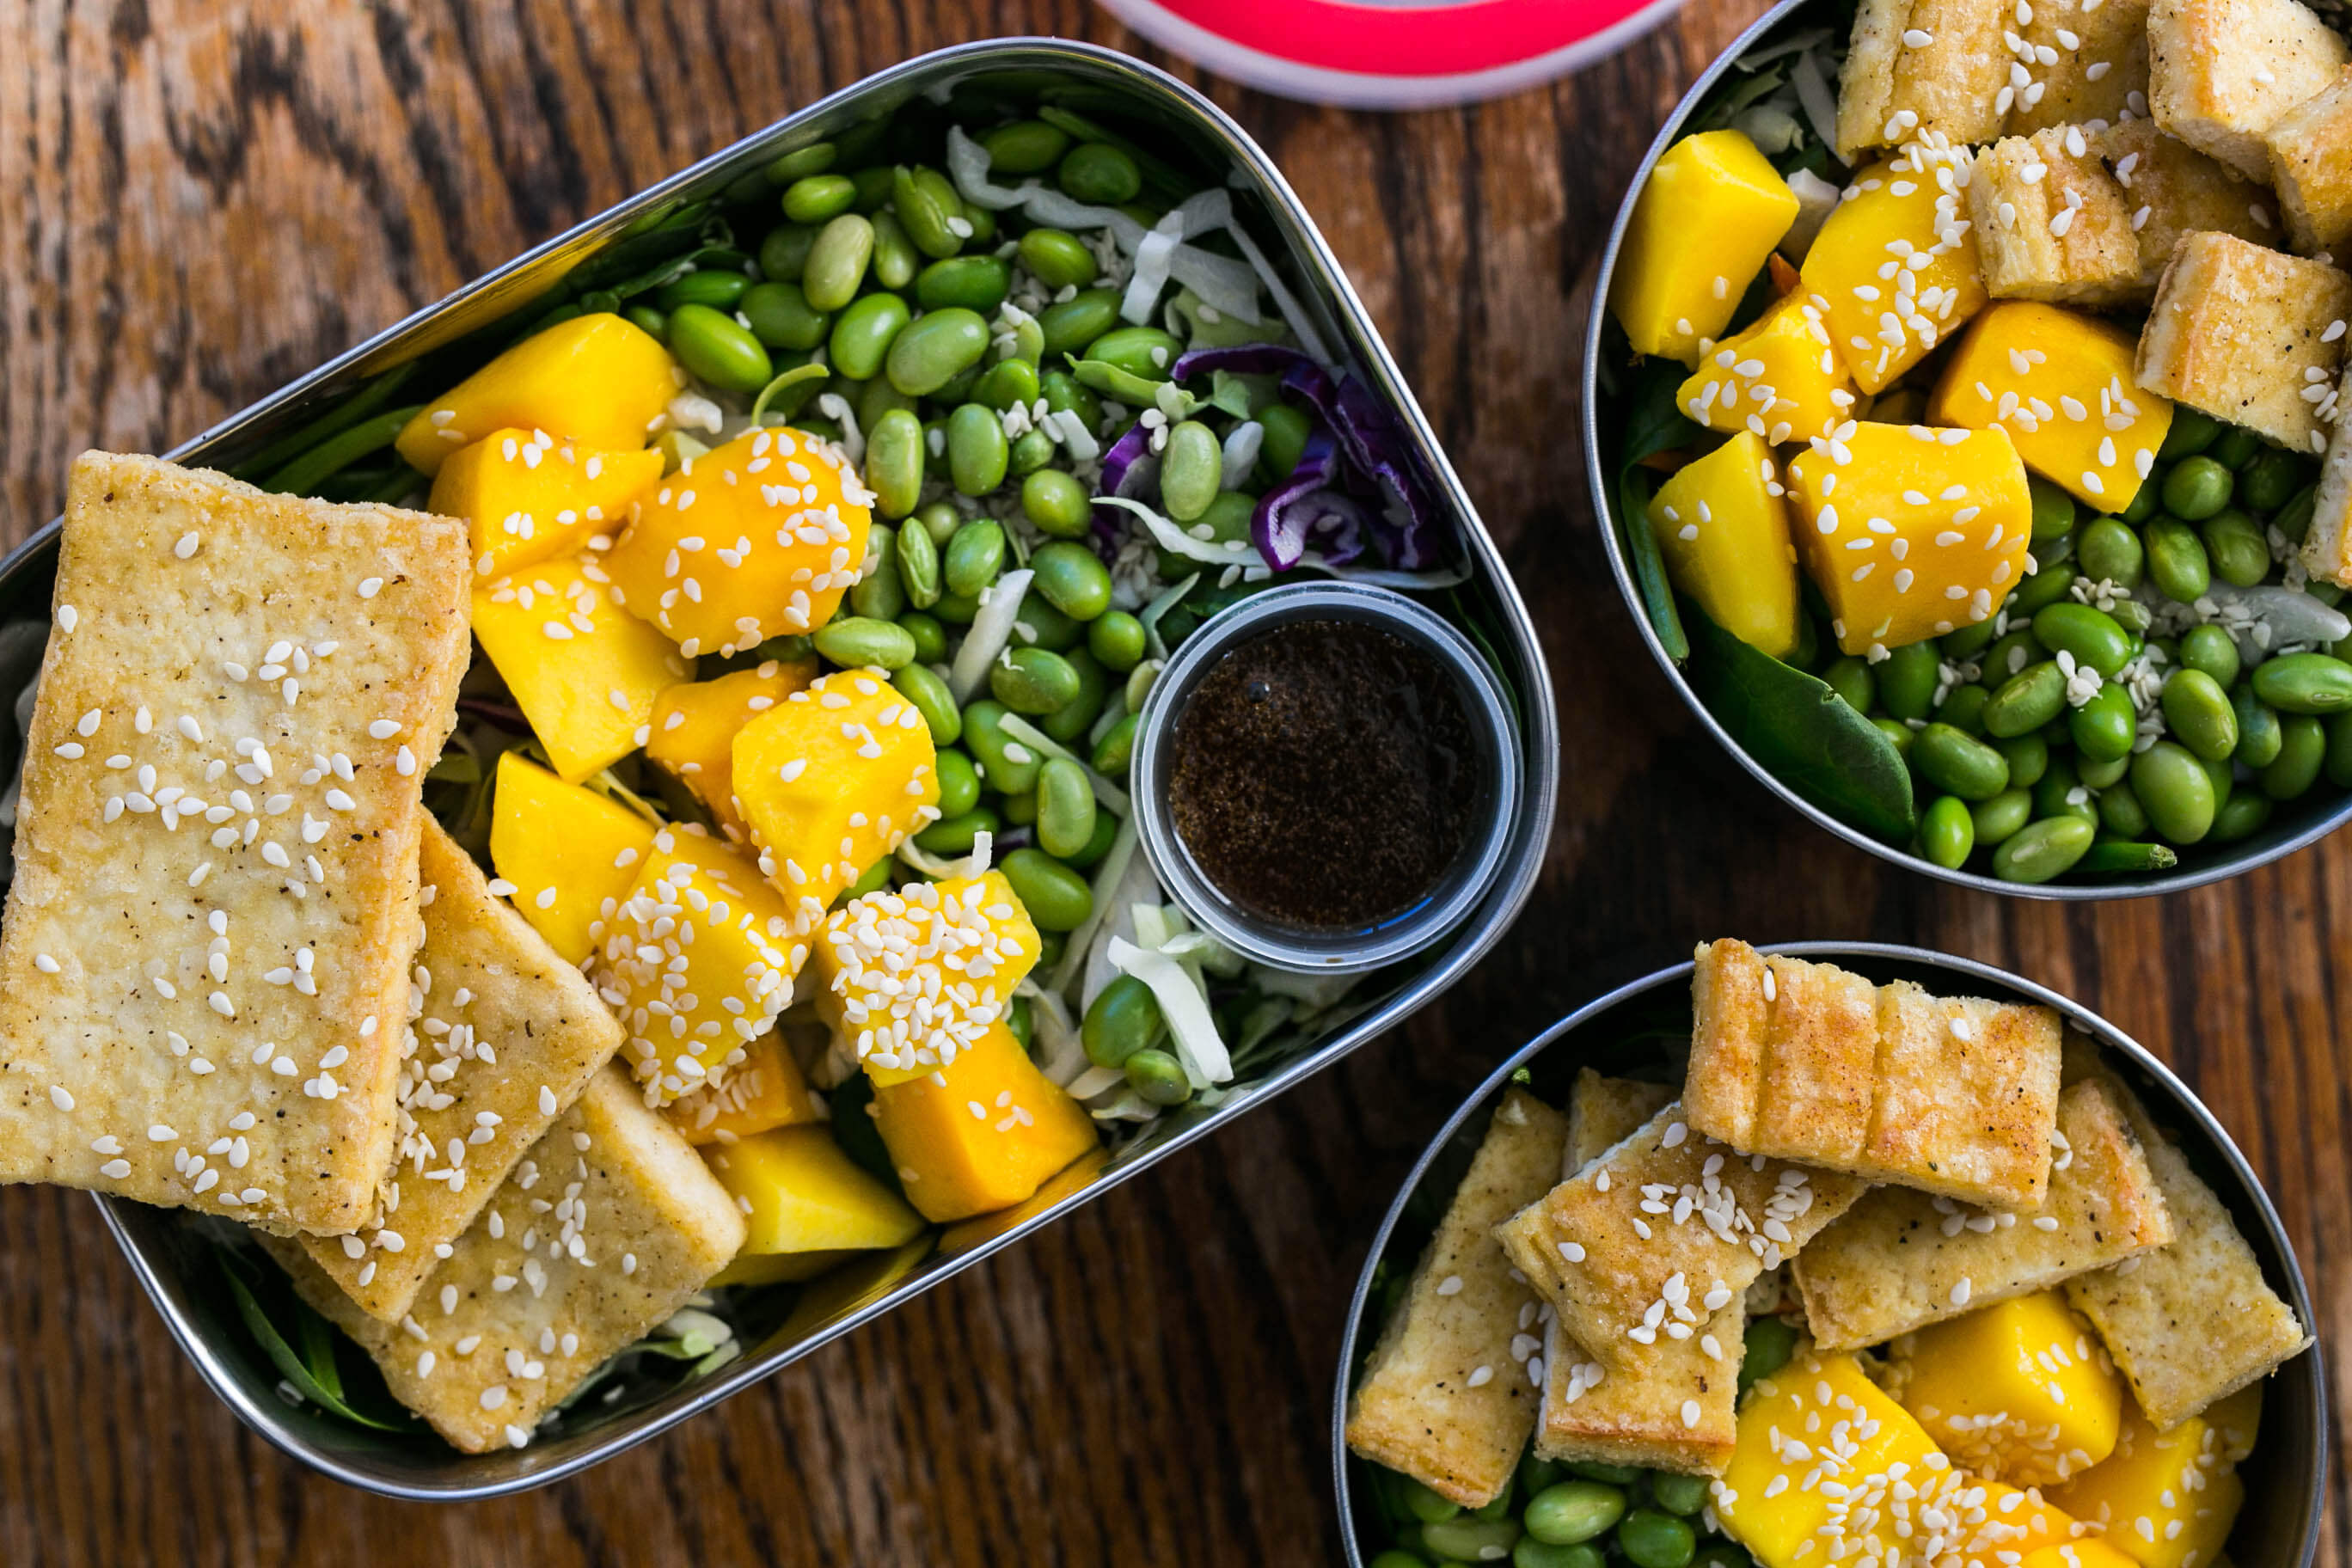 How a Gut Health Expert Meal Plans for Clients: Crispy Tofu Meal Prep Bowls